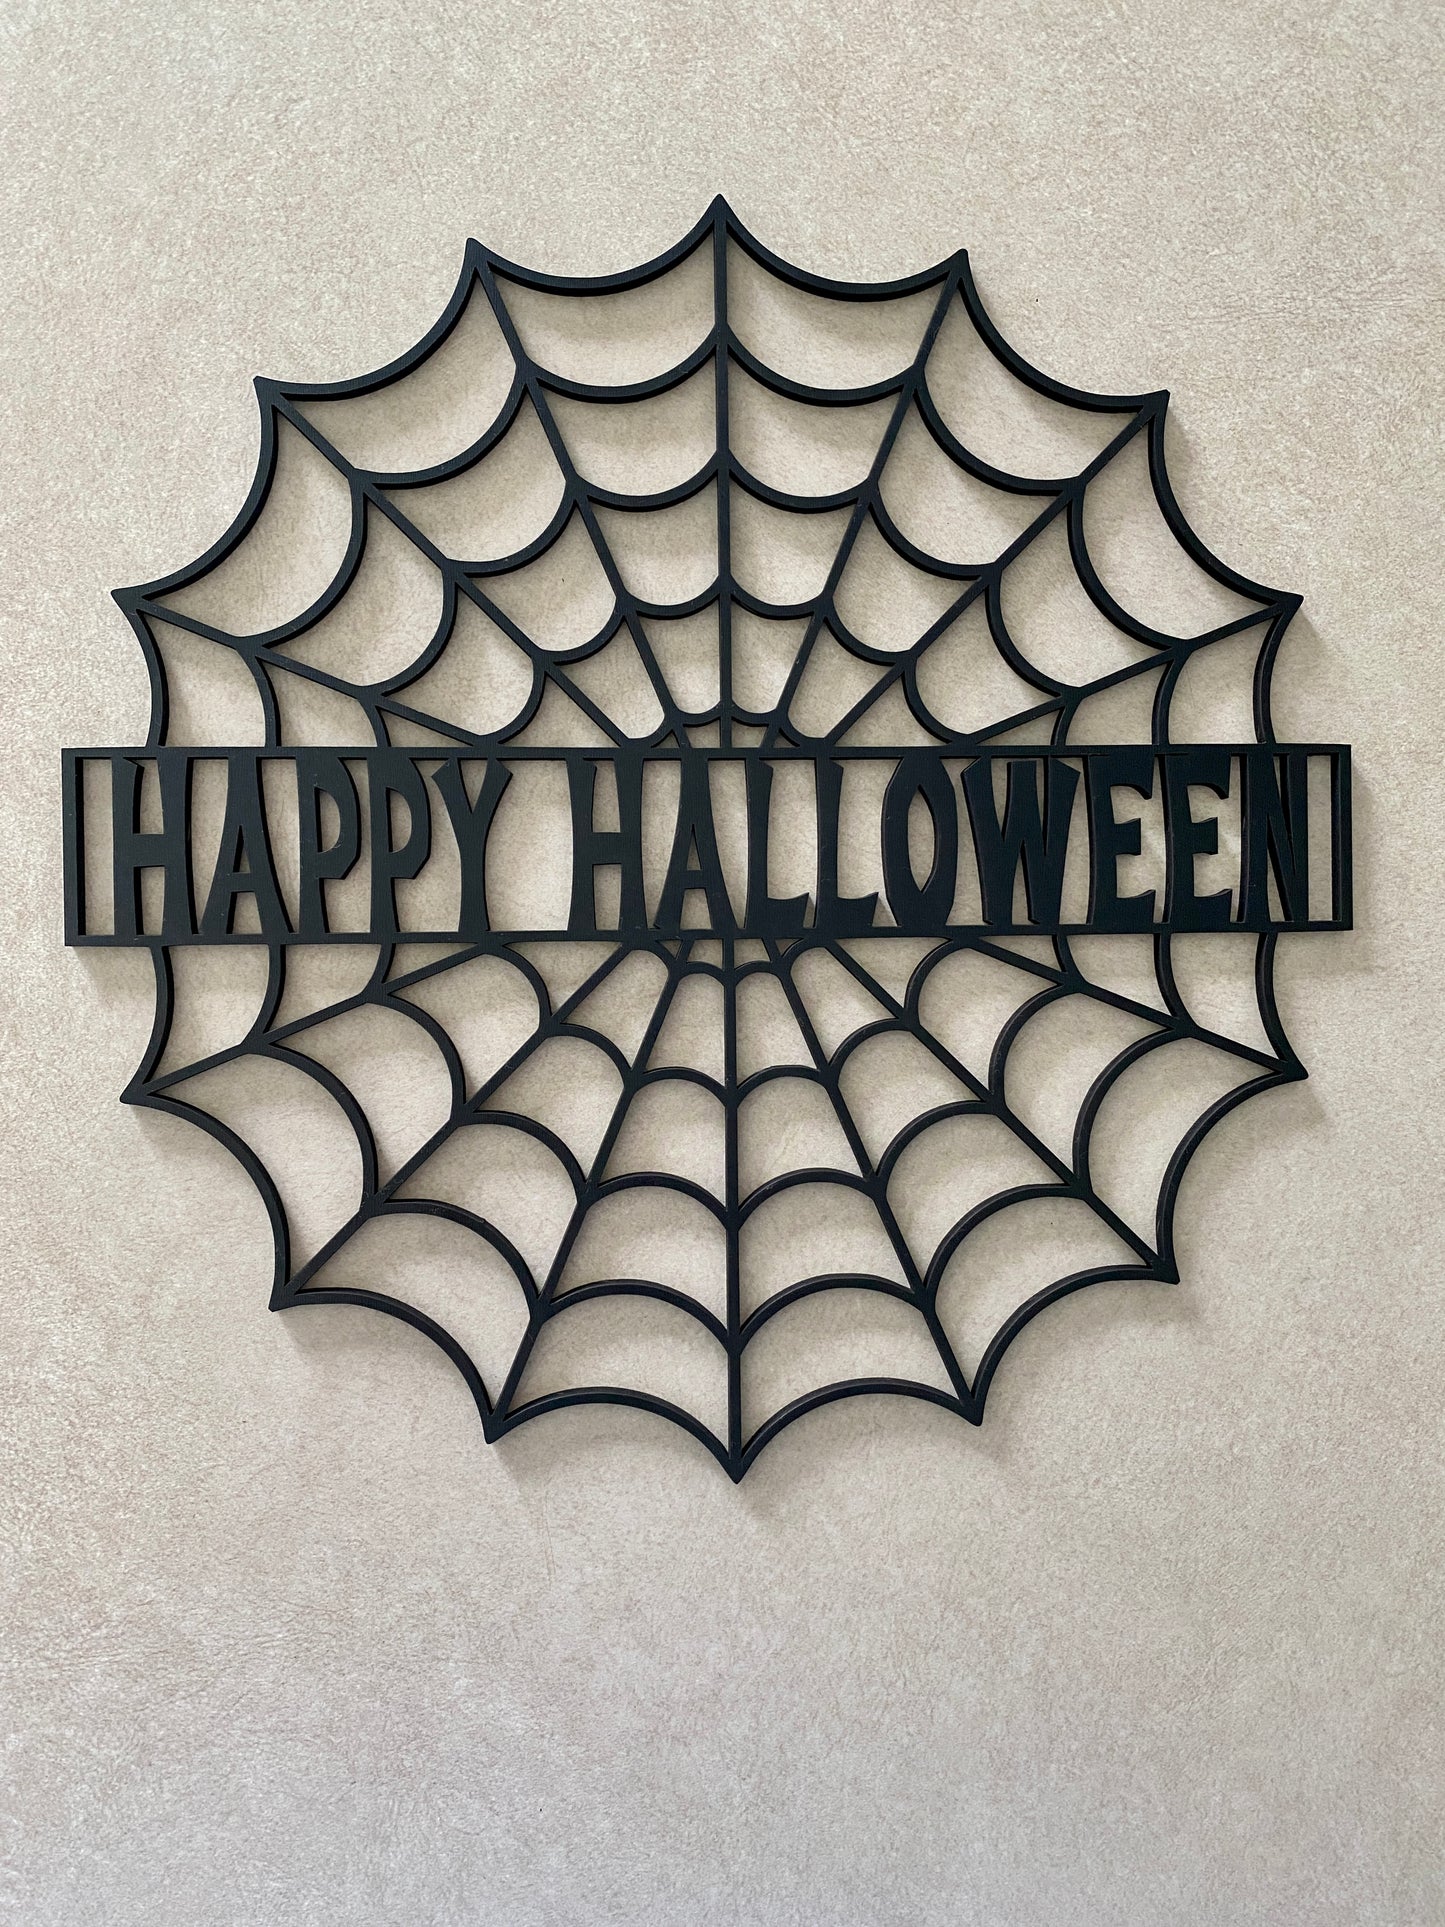 Happy Halloween Spiderweb Cut Out Wall Hanging